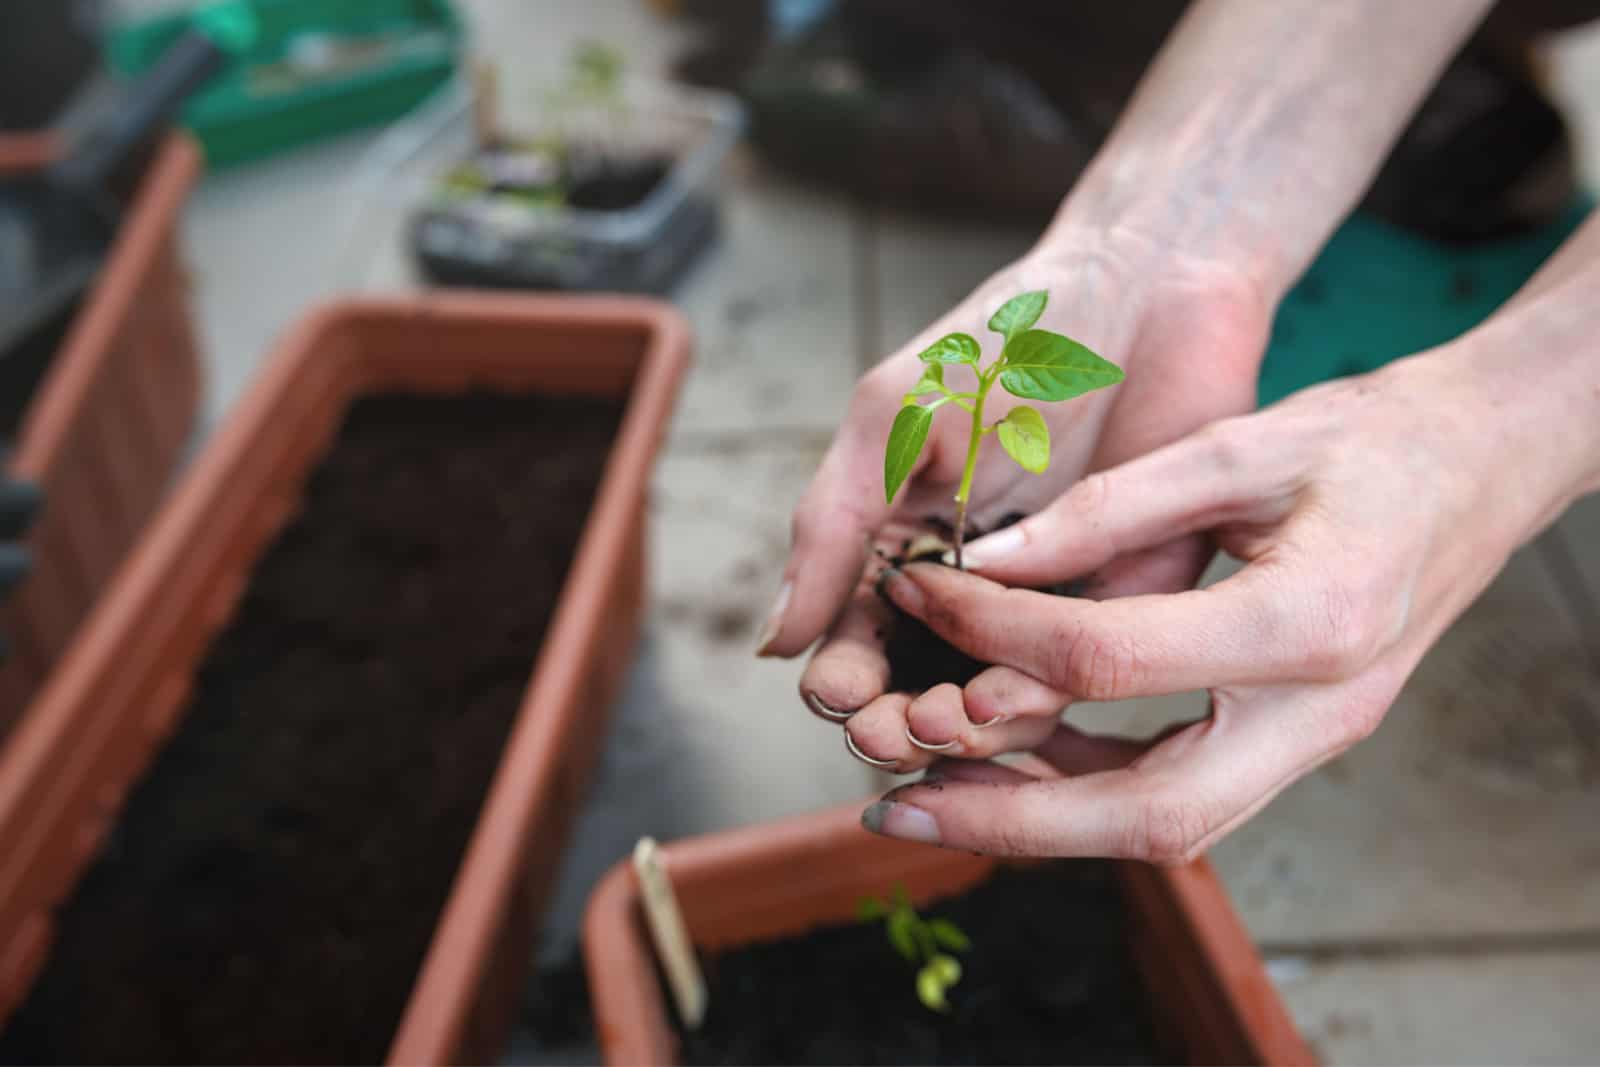 Hands of woman planting habanero pepper seedlings in the soil in a garden planter box